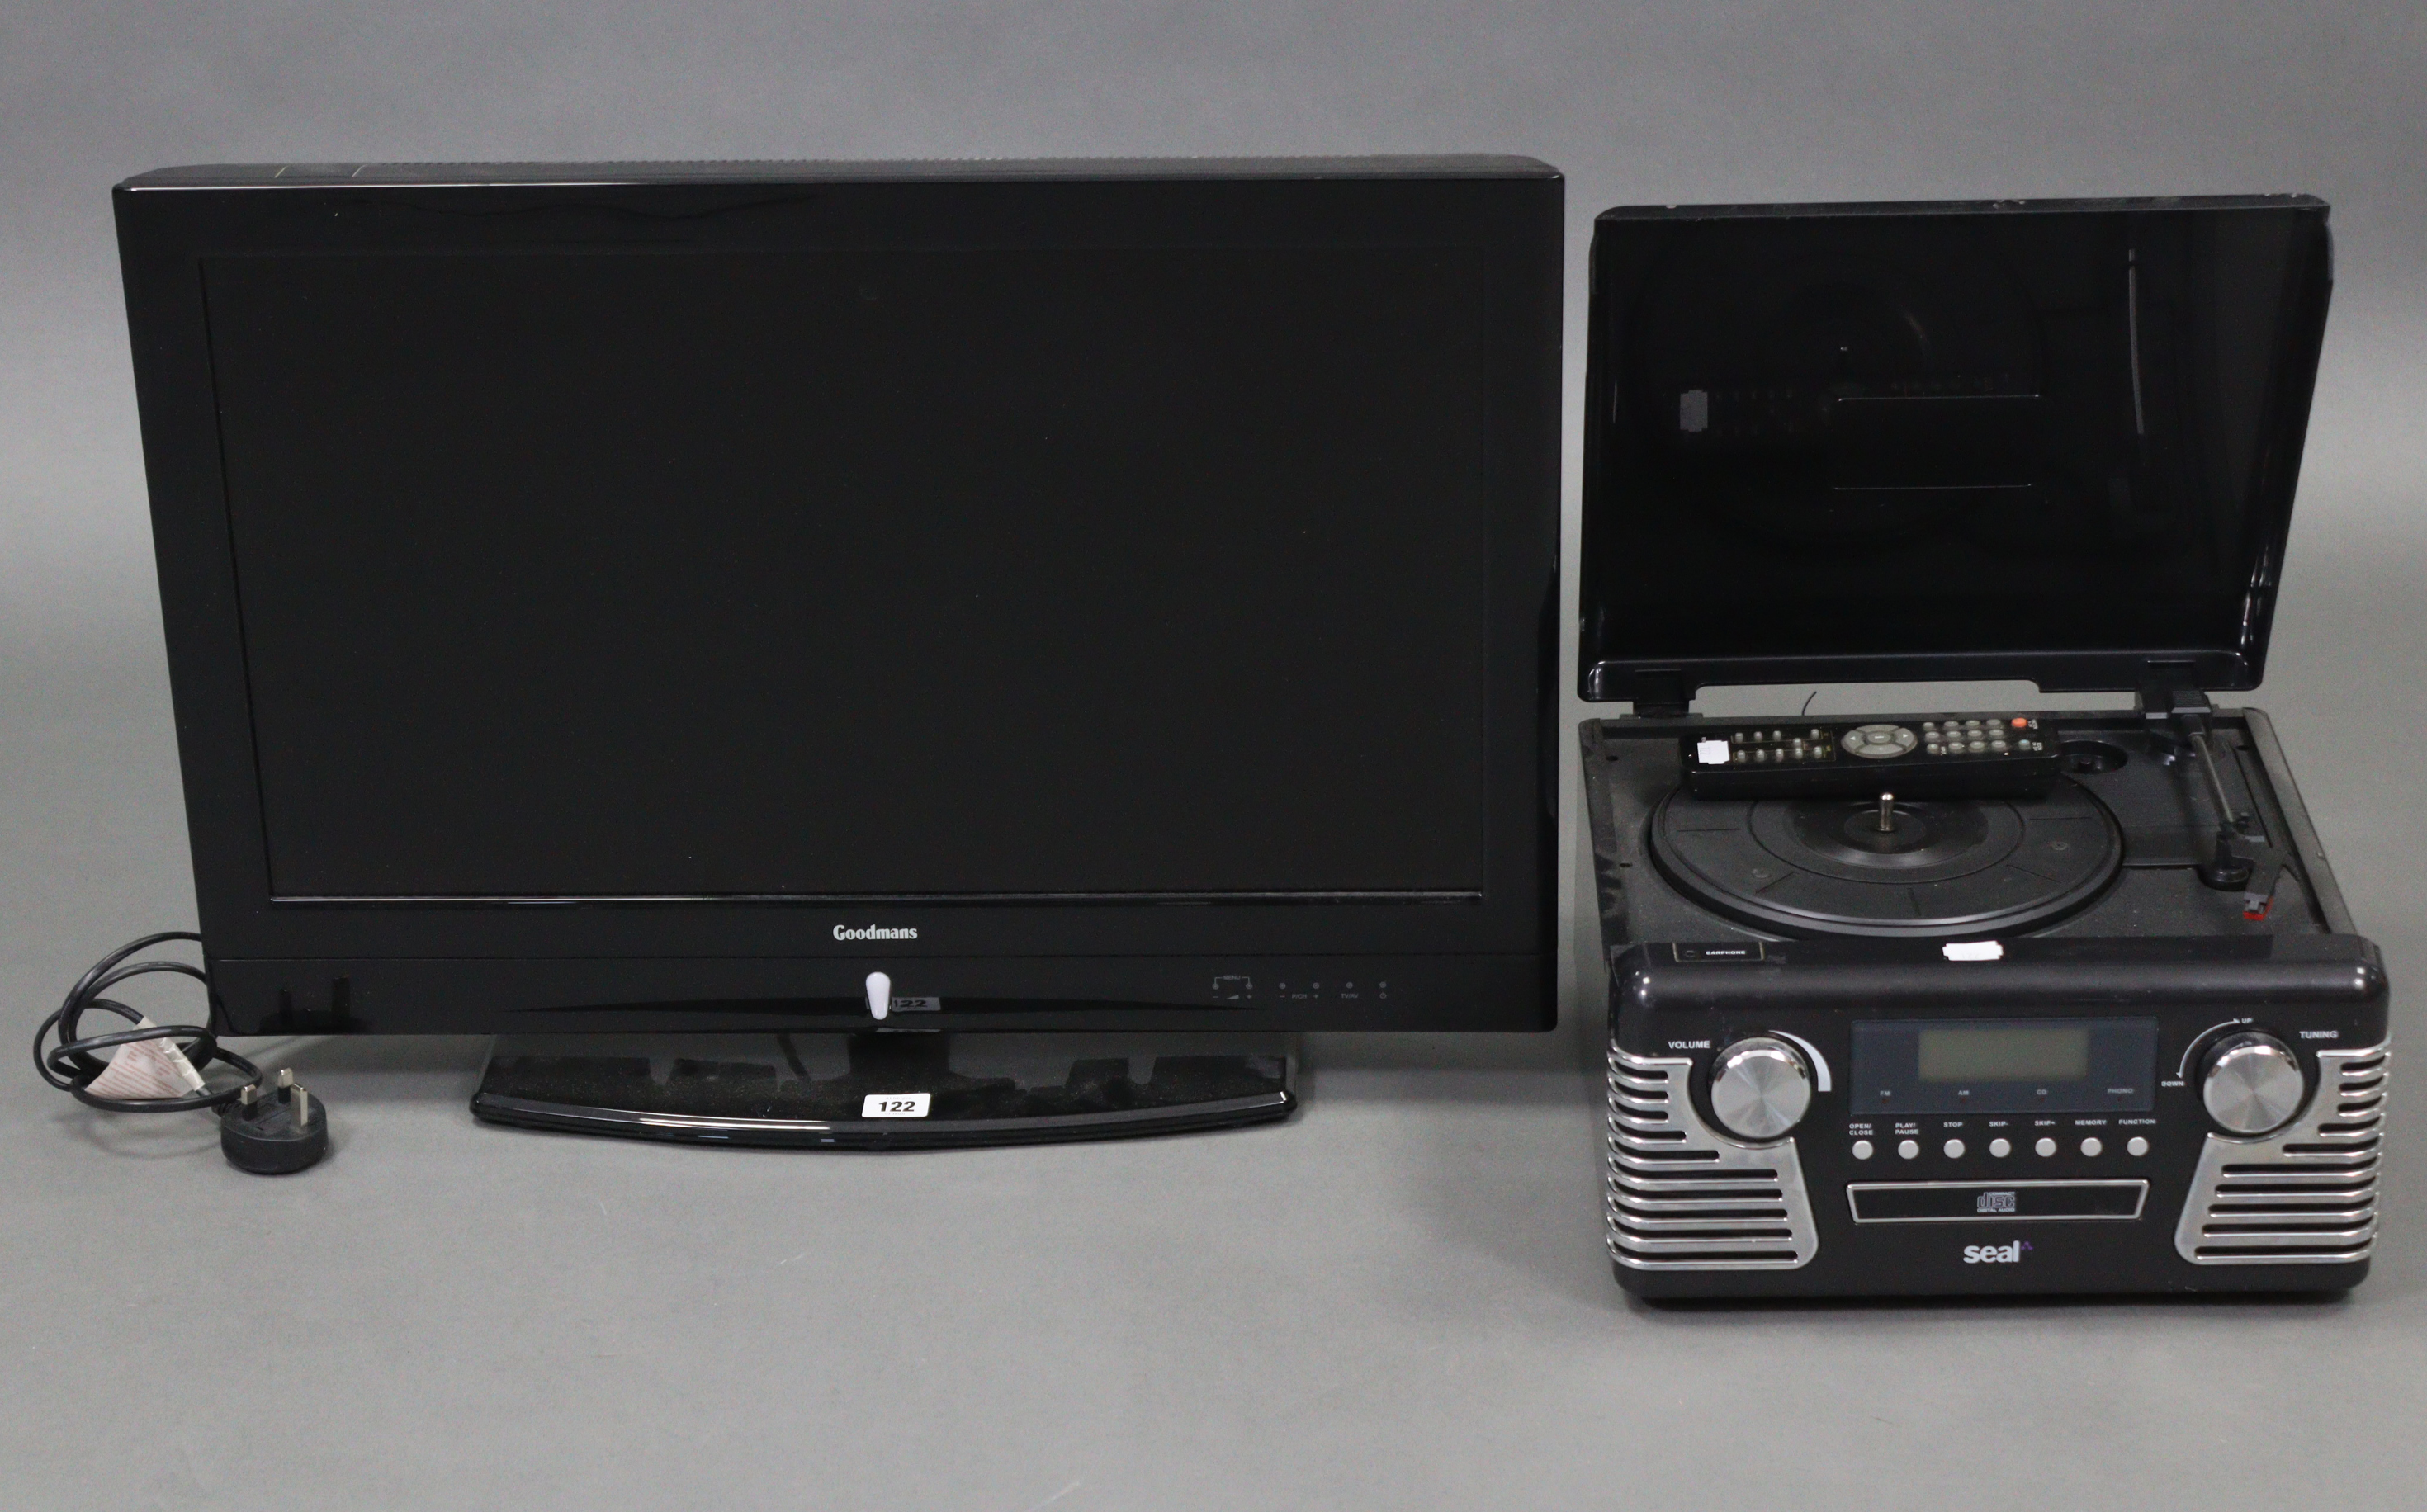 A Goodman’s 26” colour television; & a Seal compact disc player with remote control, both w.o.